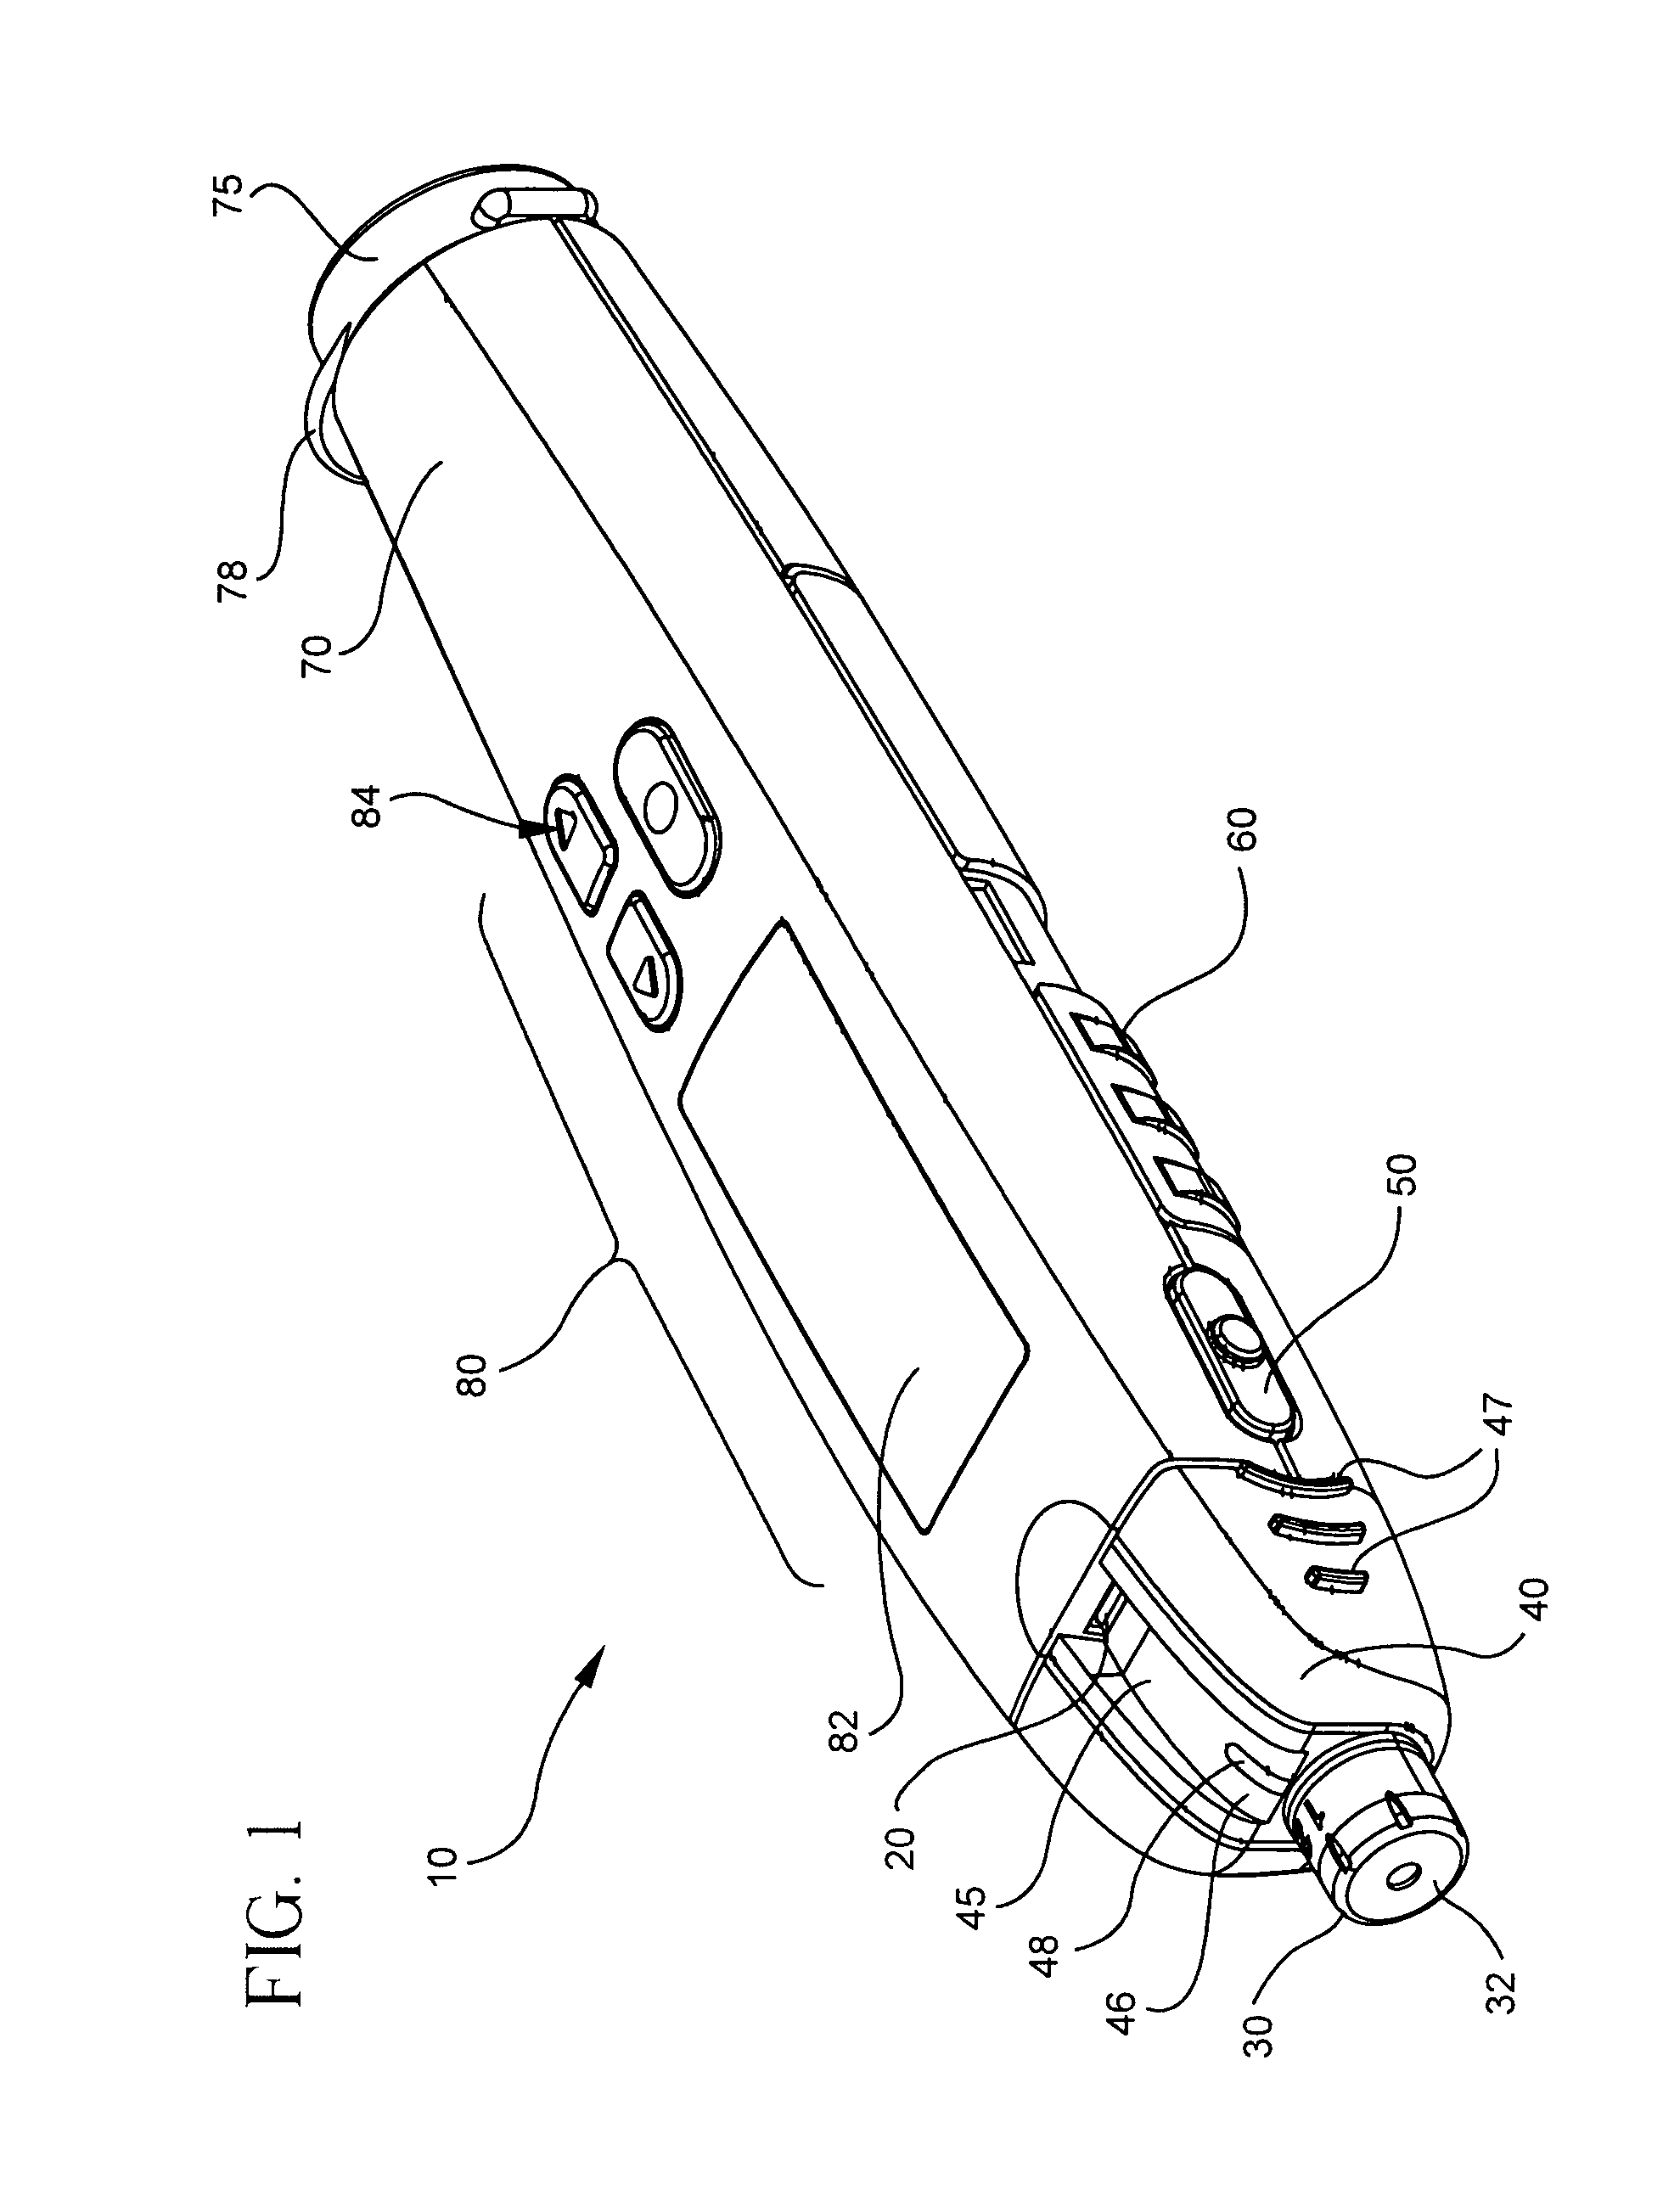 Blood glucose meter having integral lancet device and test strip storage vial for single handed use and methods for using same